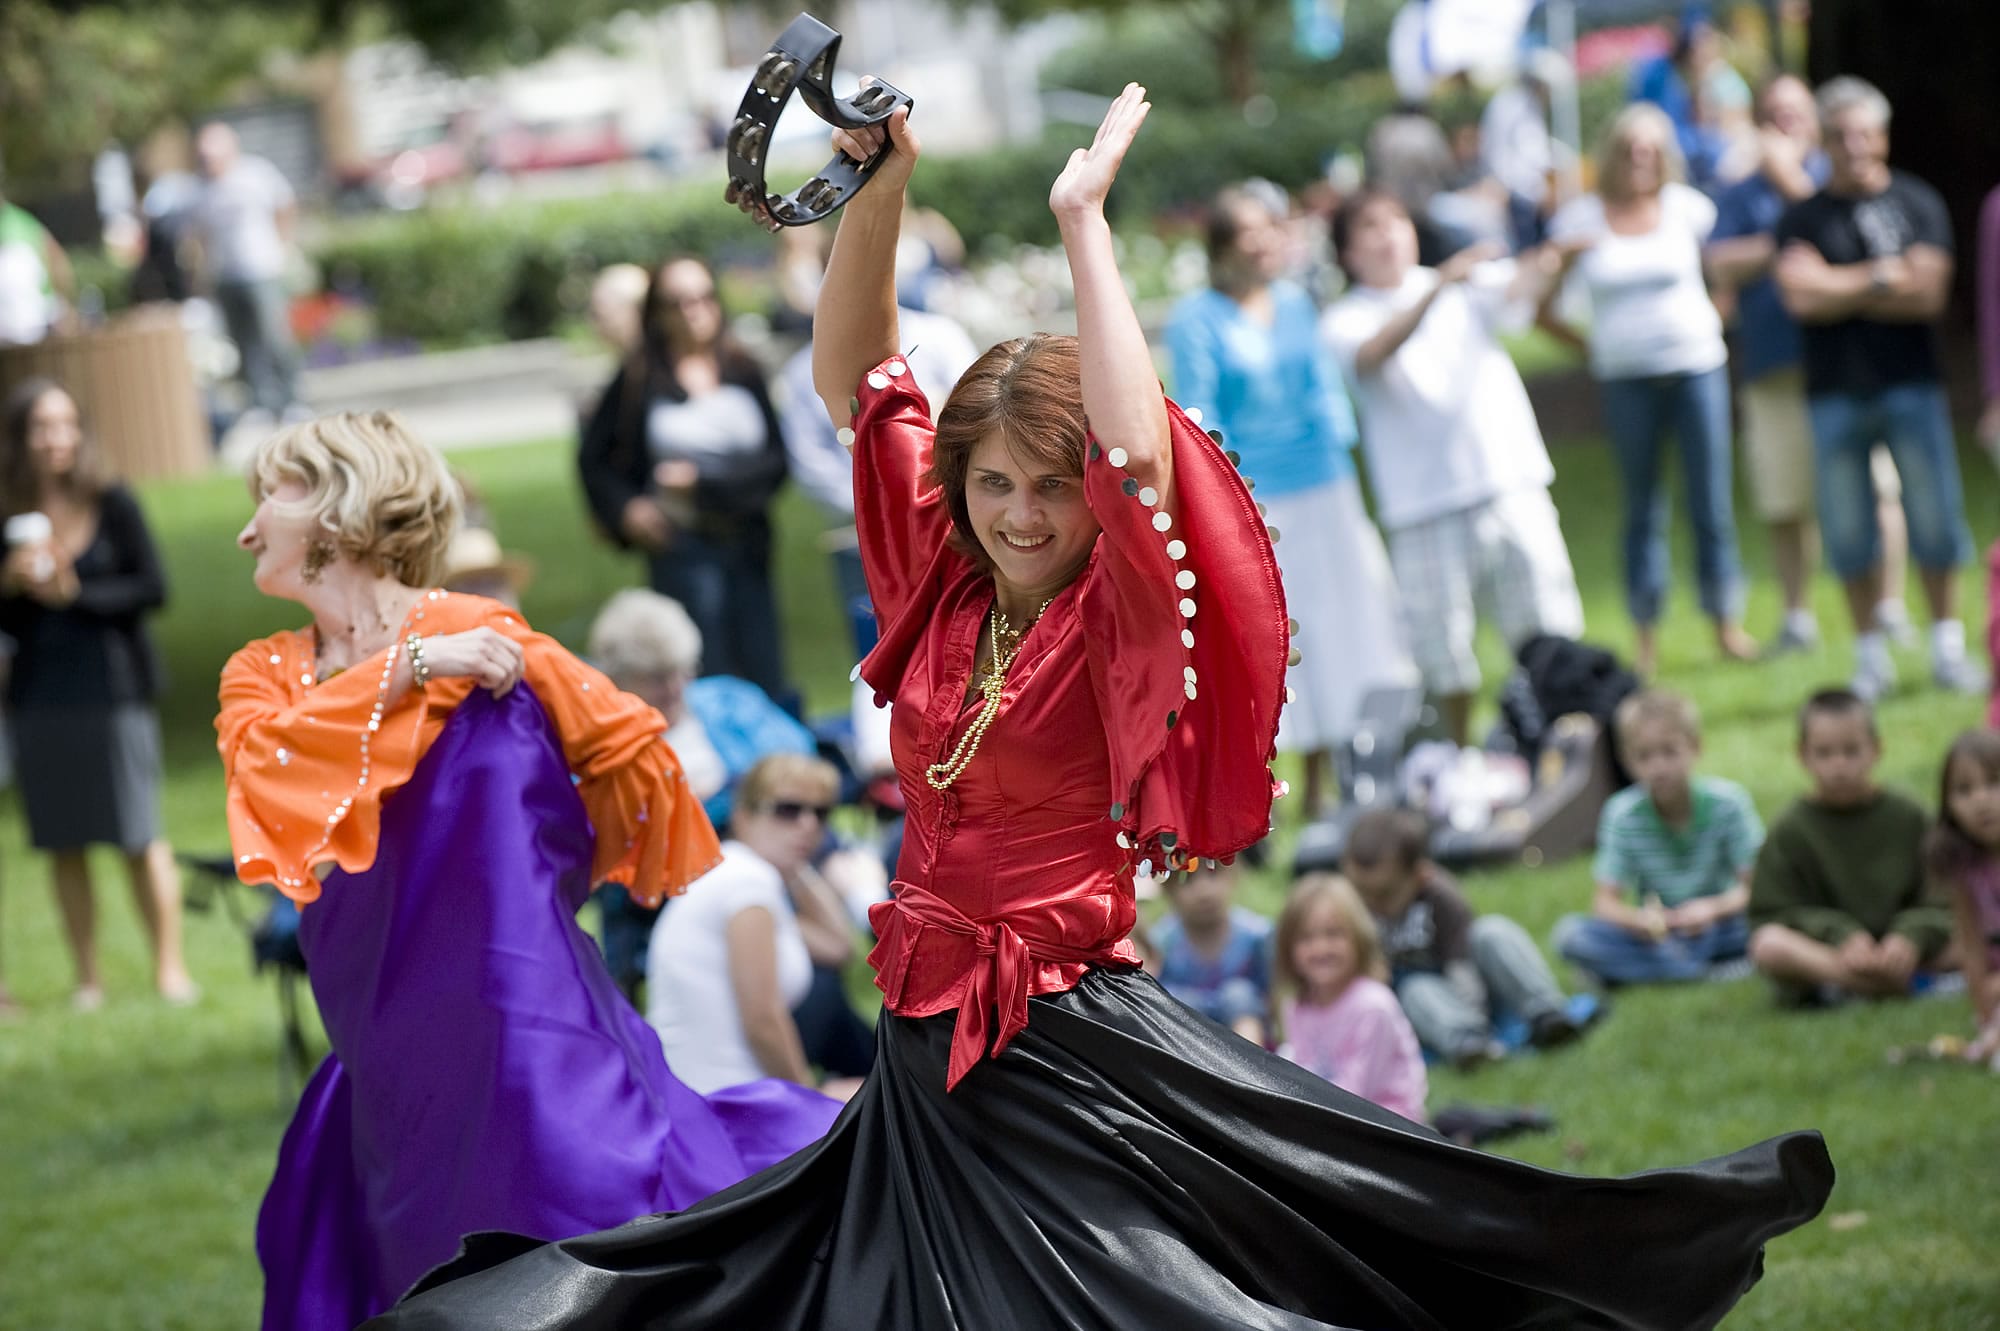 Katya Ponomareva, from the Russian Community Center in Redmond, entertains with a traditional dance at the Russian-American cultural festival in Esther Short Park in 2010.